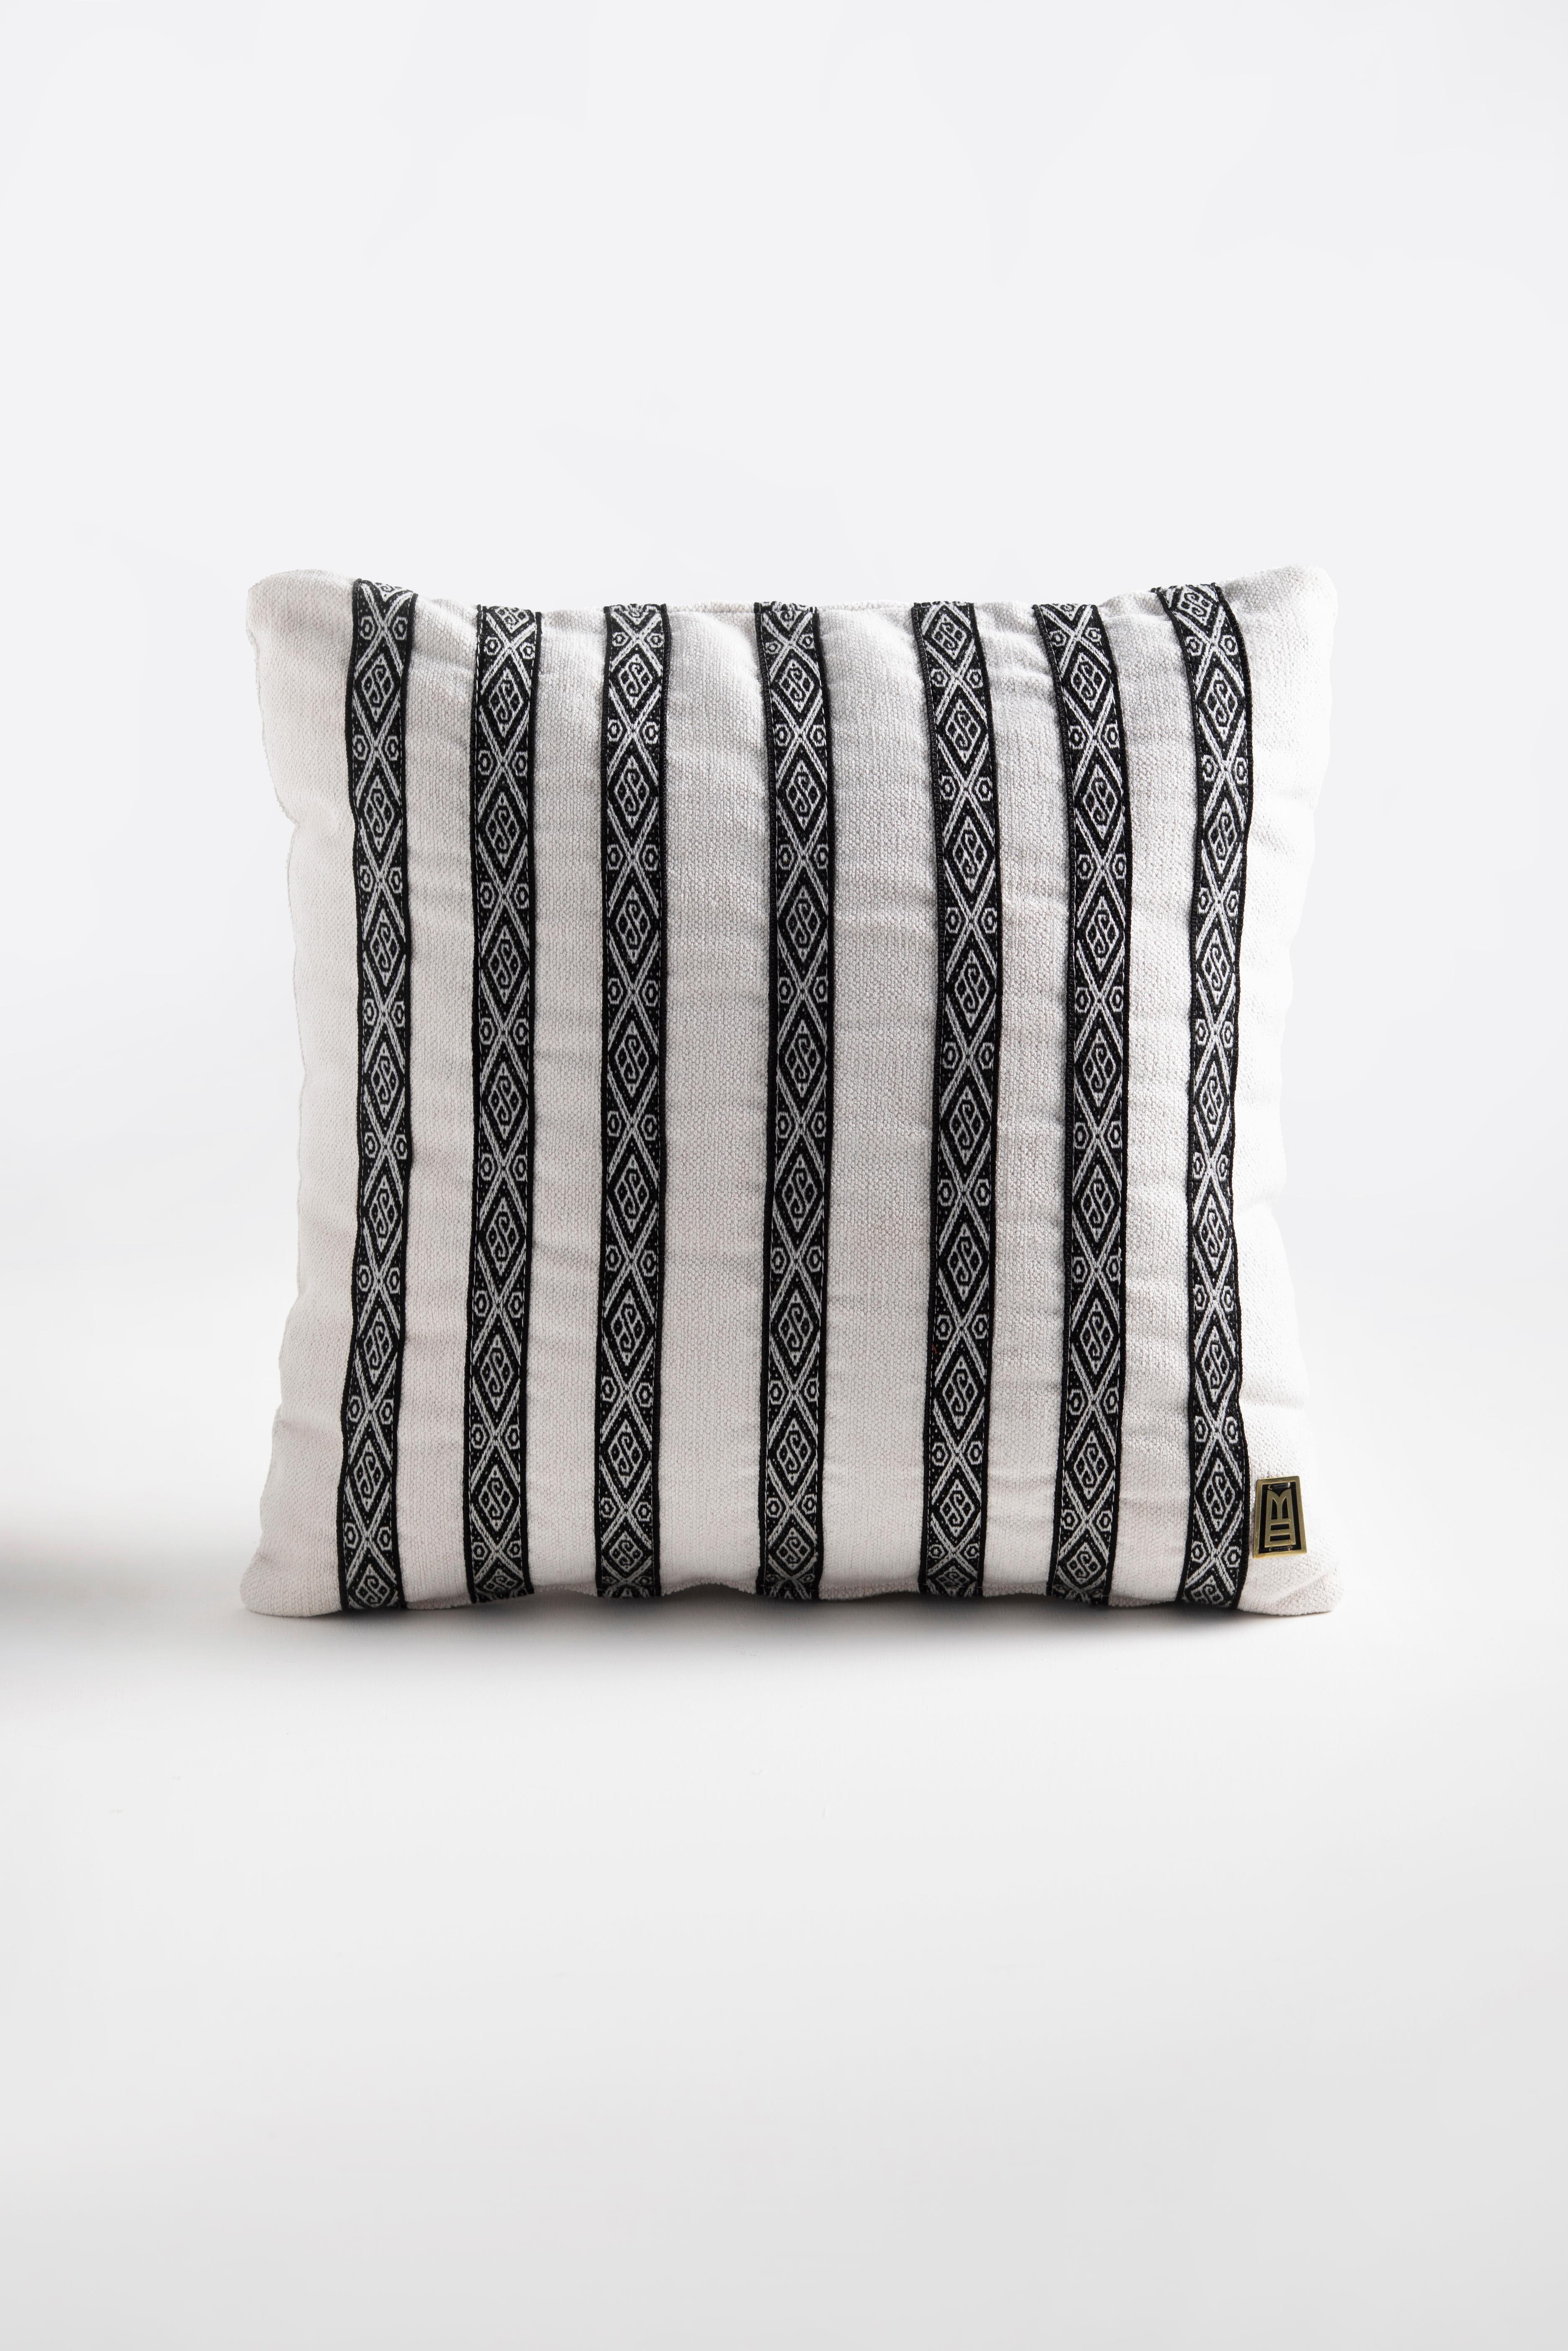 Decorative pillows with handwoven artisanal sash details from Peguche, Imbabura, and waterproof velvet or upholstery fabric.

These decorative cushions are carefully hand-crafted with cotton embroidery and enriched with accents of sheep fur and